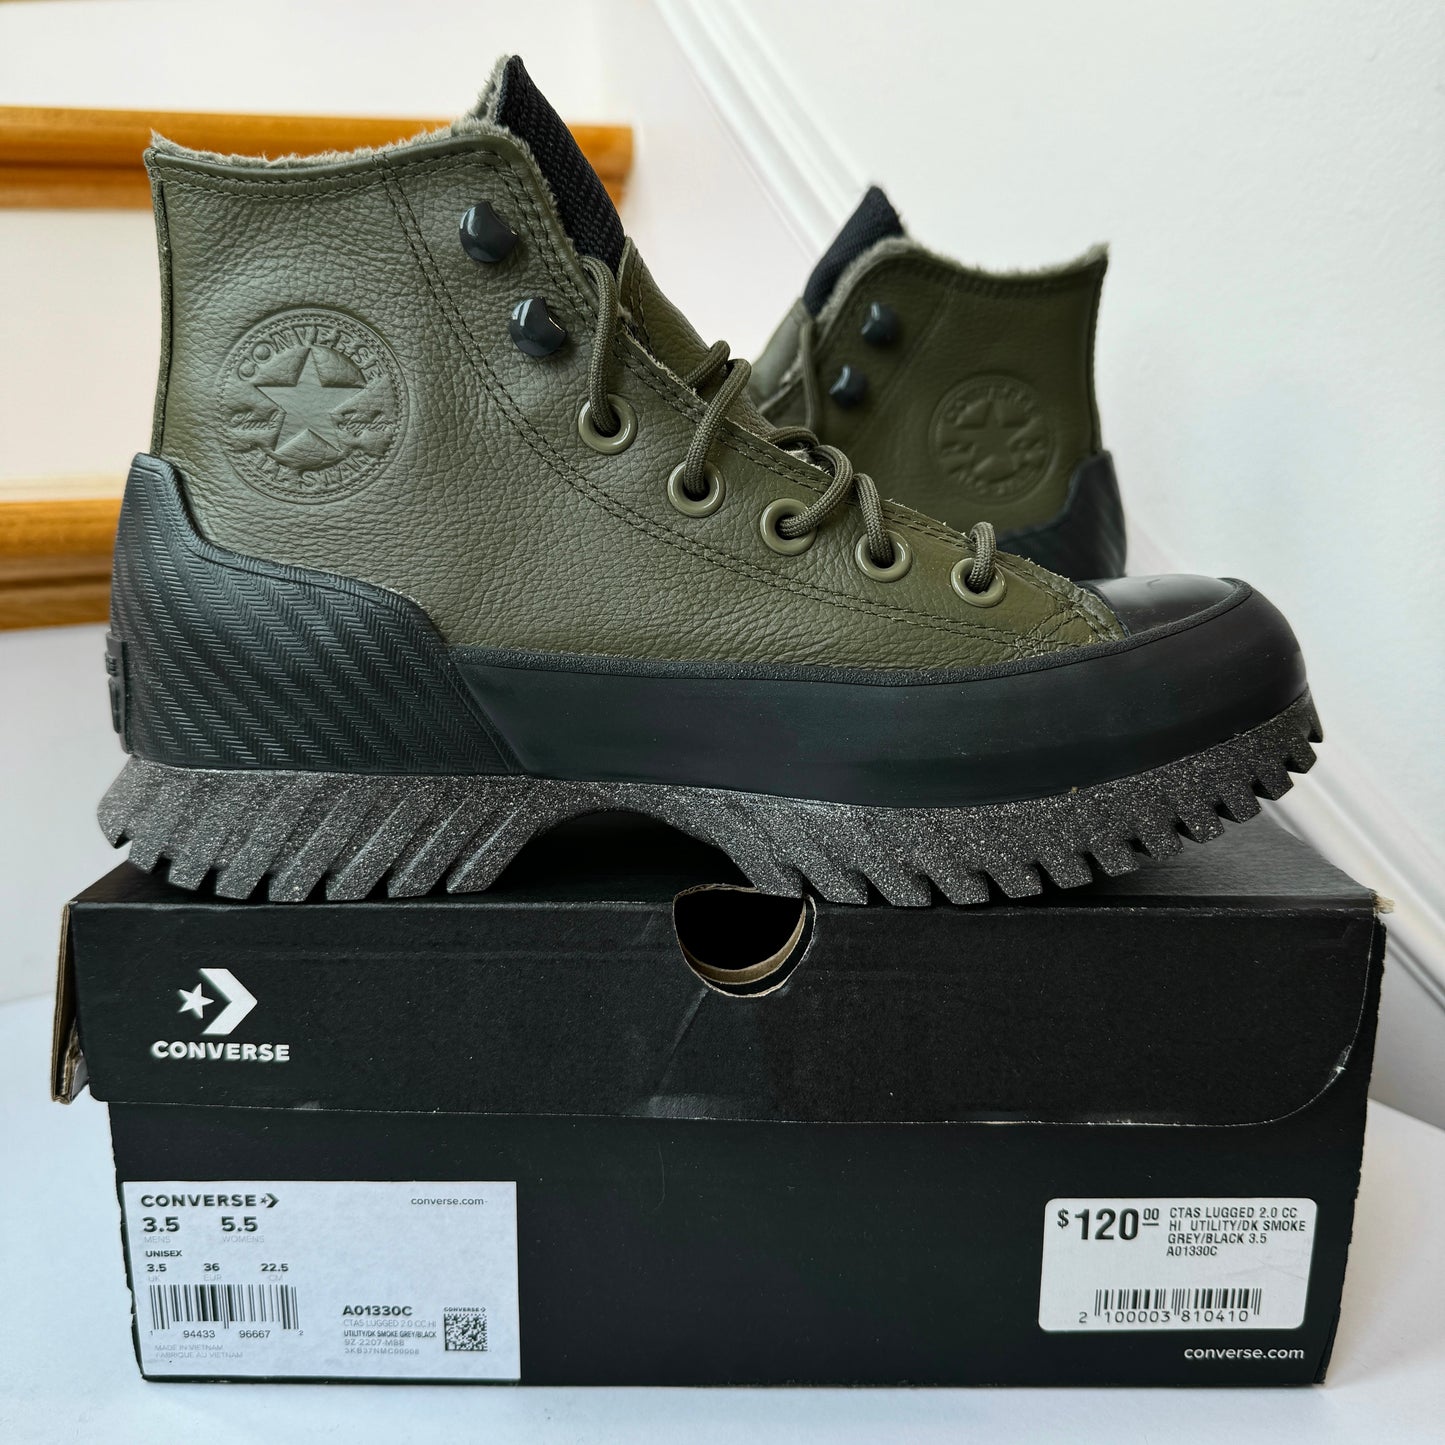 Converse Counter Climate Lugged Waterproof Platform Sneakers Green / Black